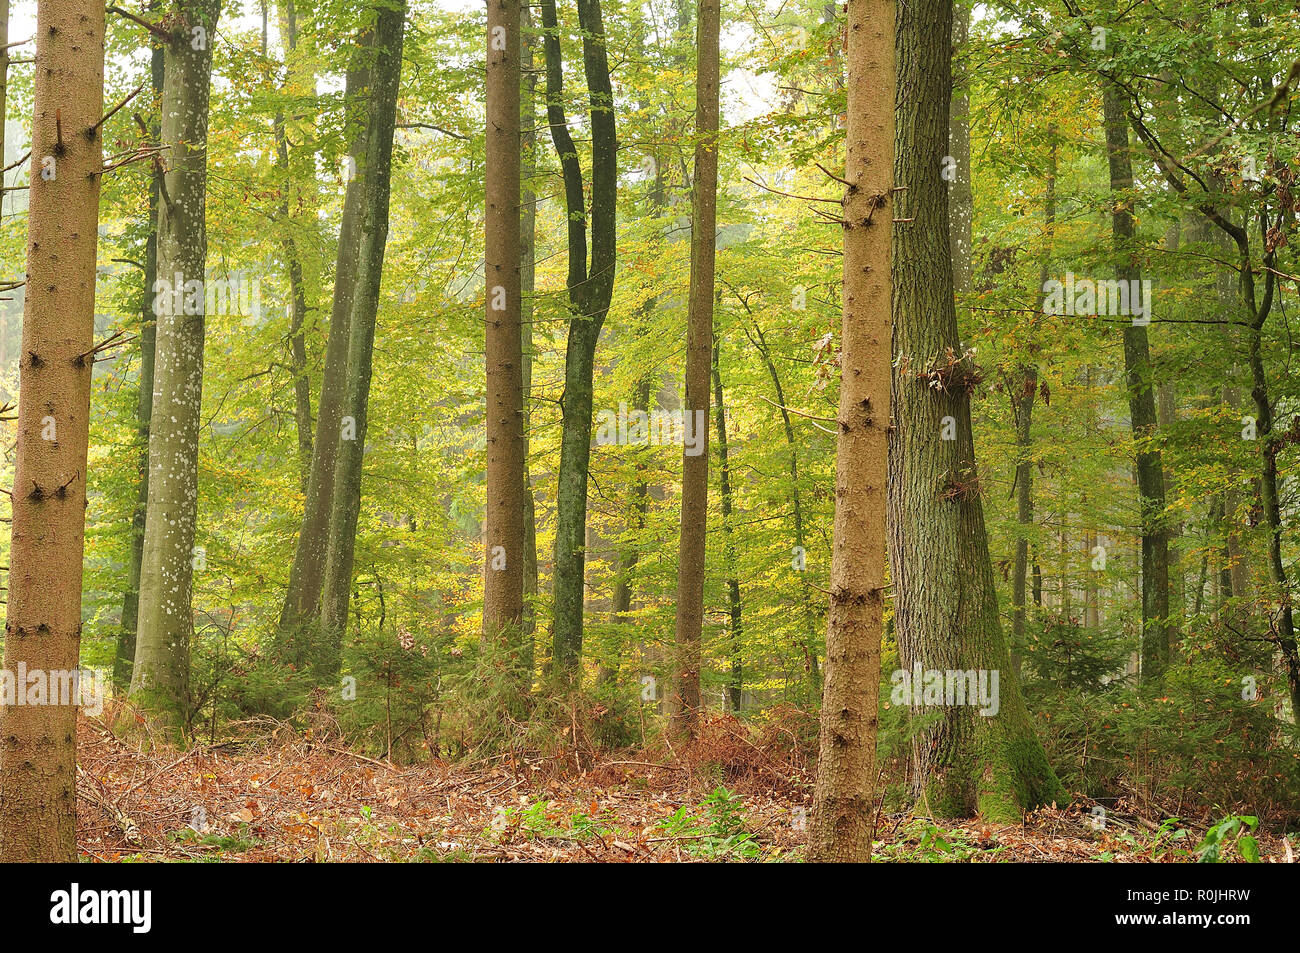 view into mixed forest with trunks of beech, spruce and mountain ash trees and coniferous saplings Stock Photo